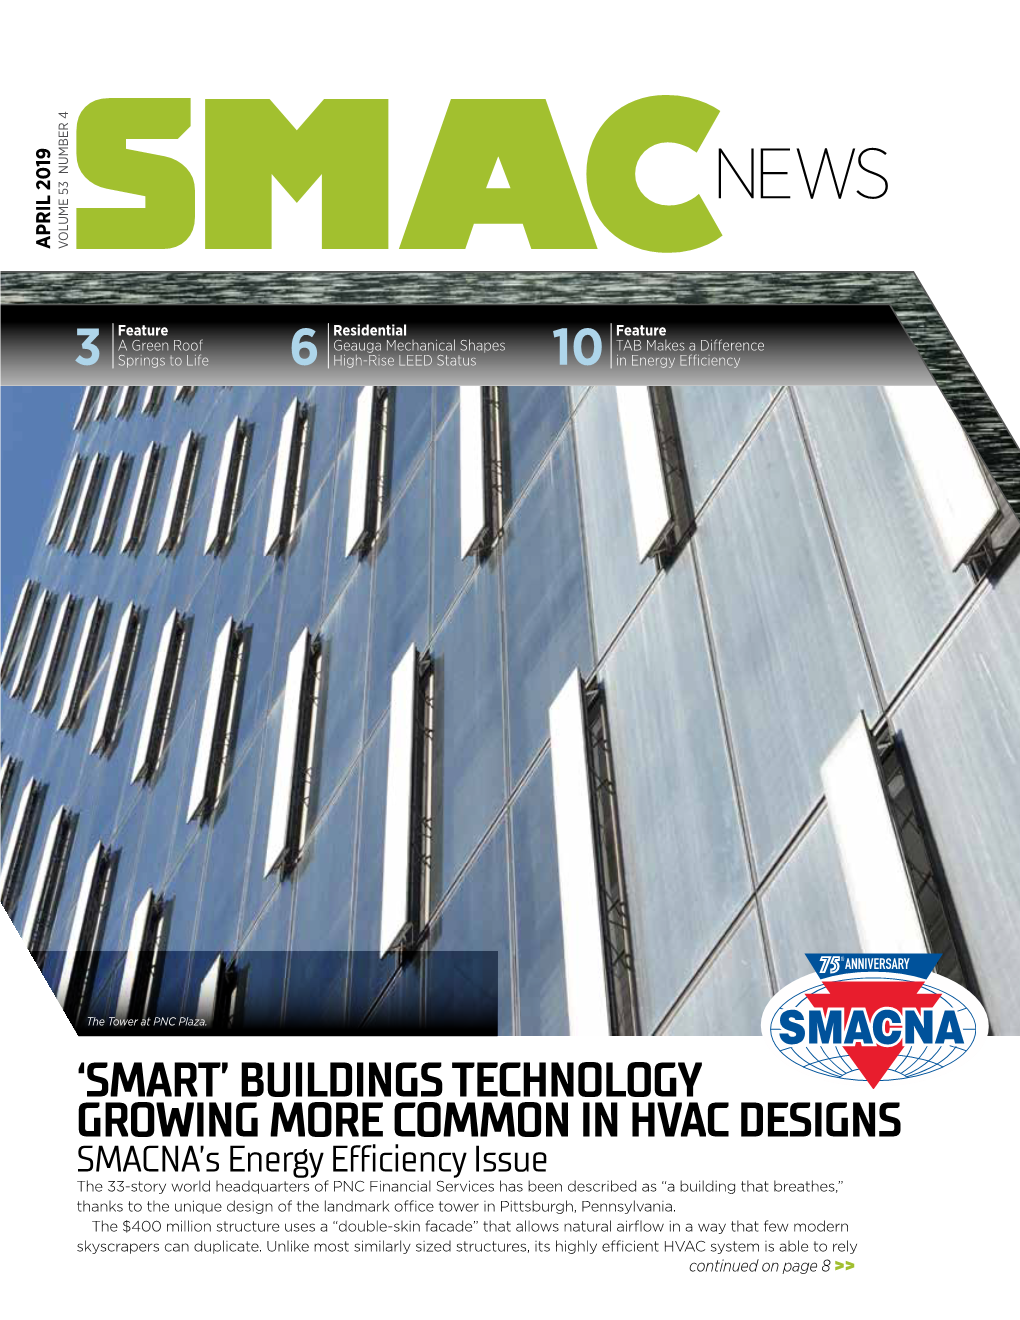 Buildings Technology Growing More Common in Hvac Designs